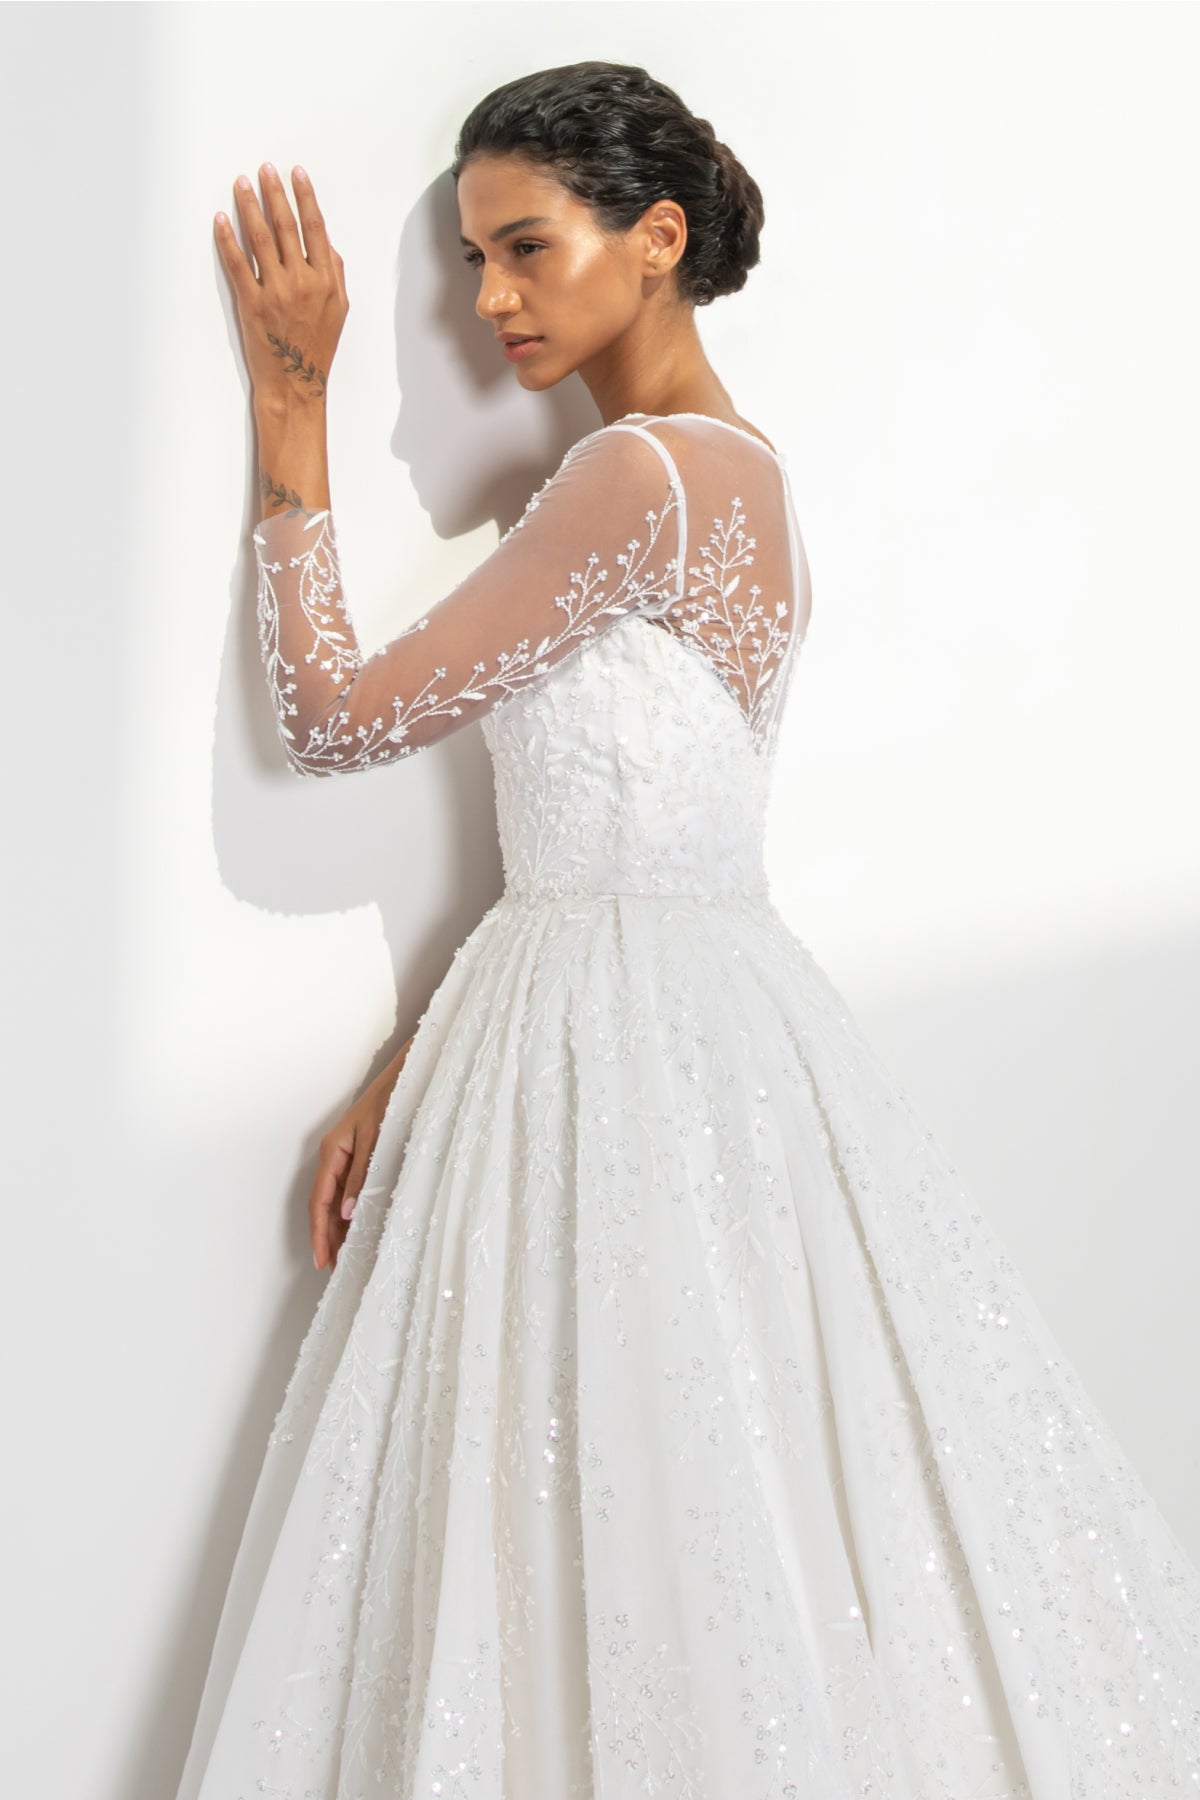 White tulle gown in branches, leaves and floral embellishments